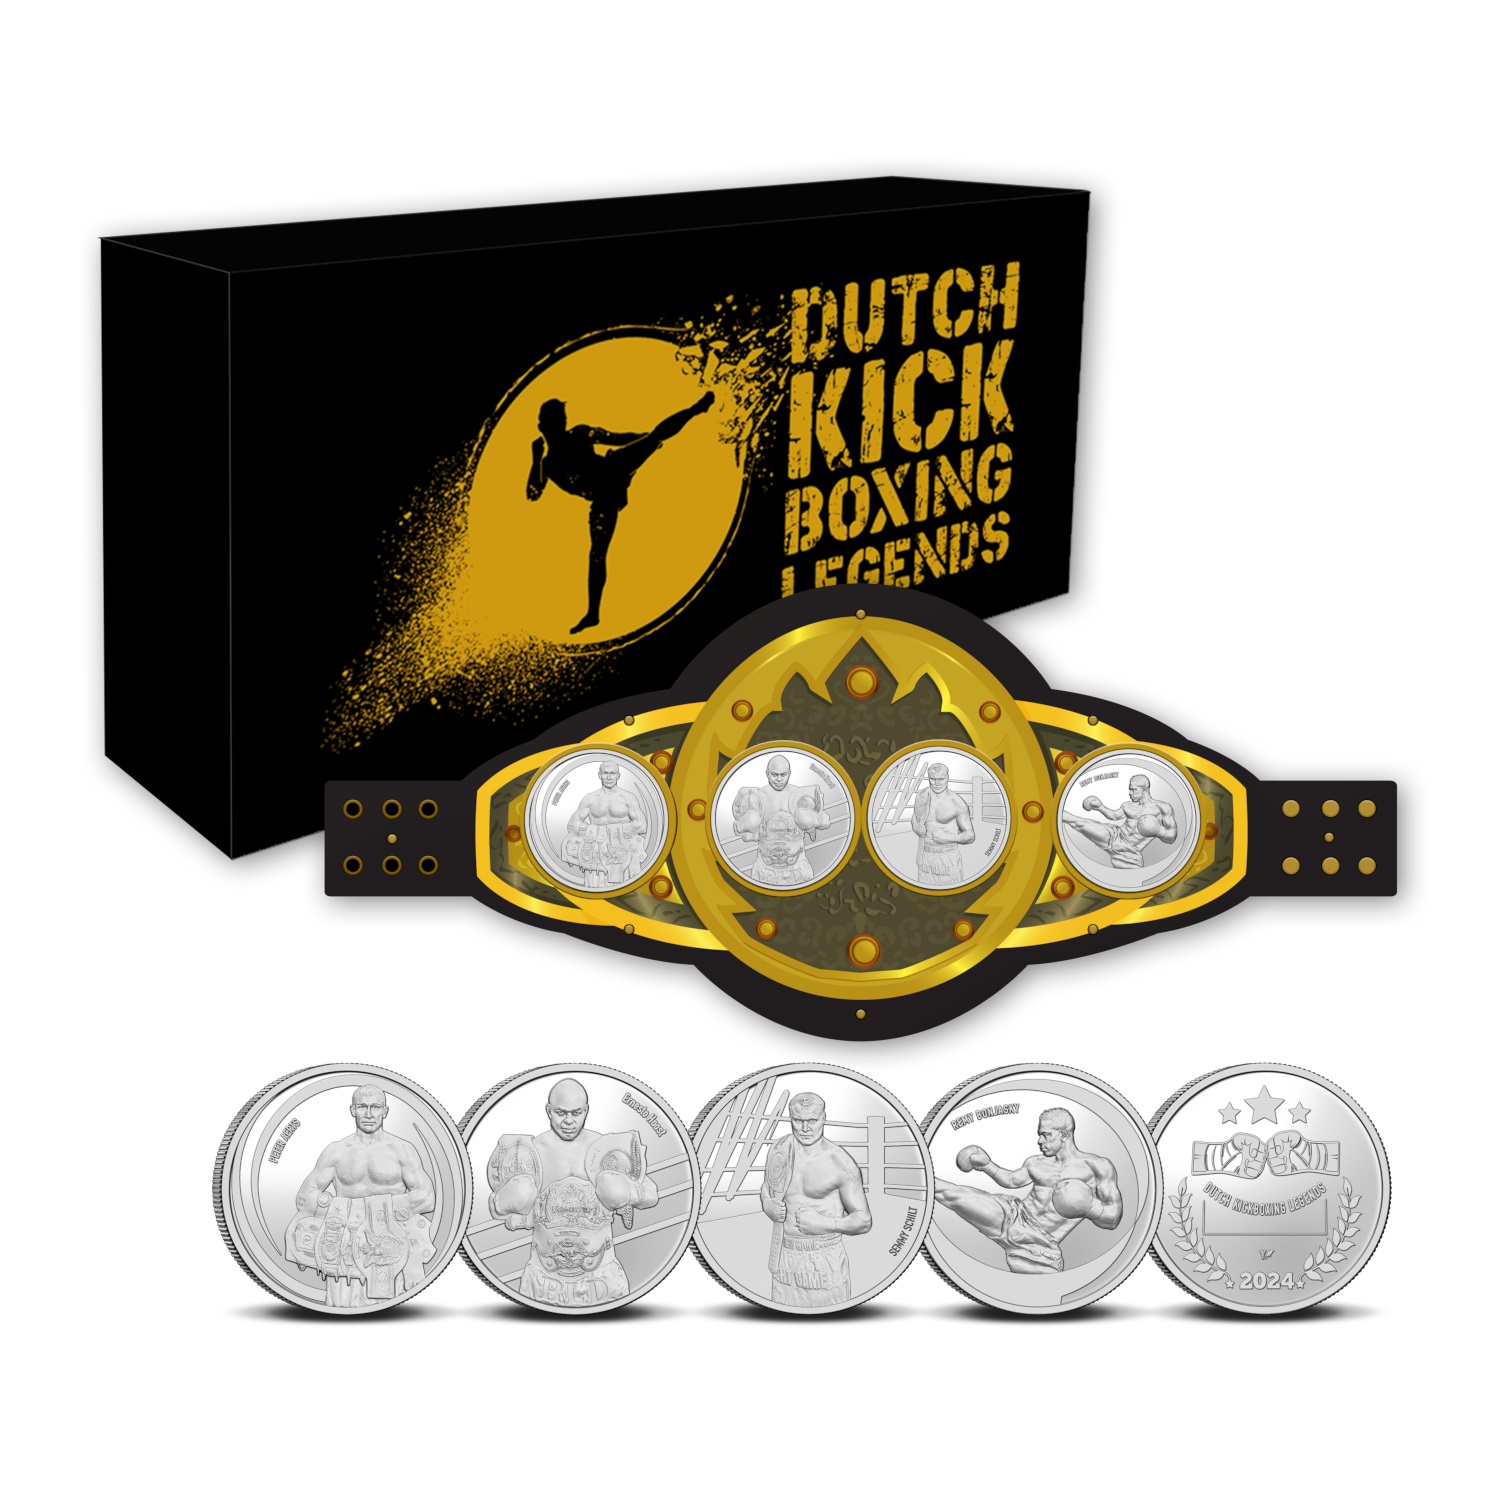 (KNM.2024.0118950) Silver plated copper-nickel medals - Dutch Kickboxing Legends (zoom)